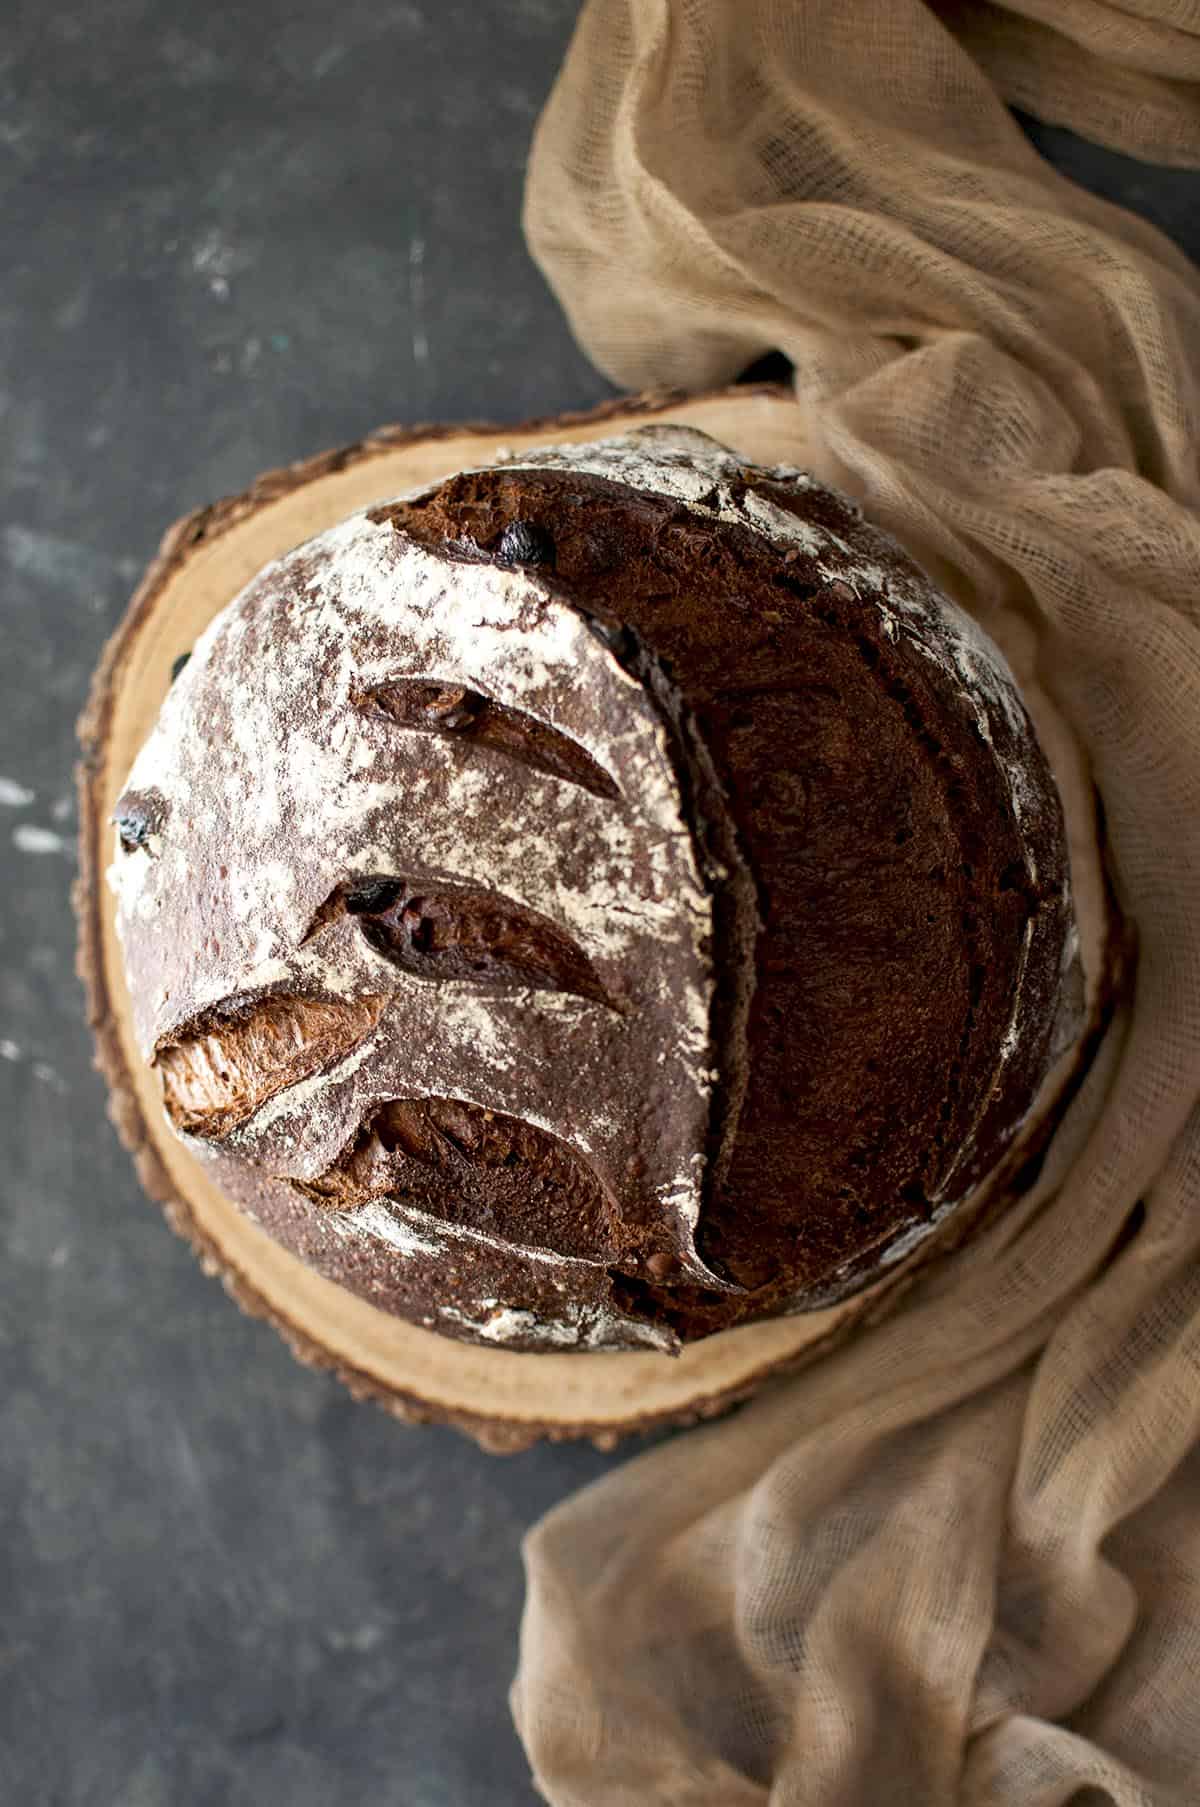 Top view of a chocolate bread